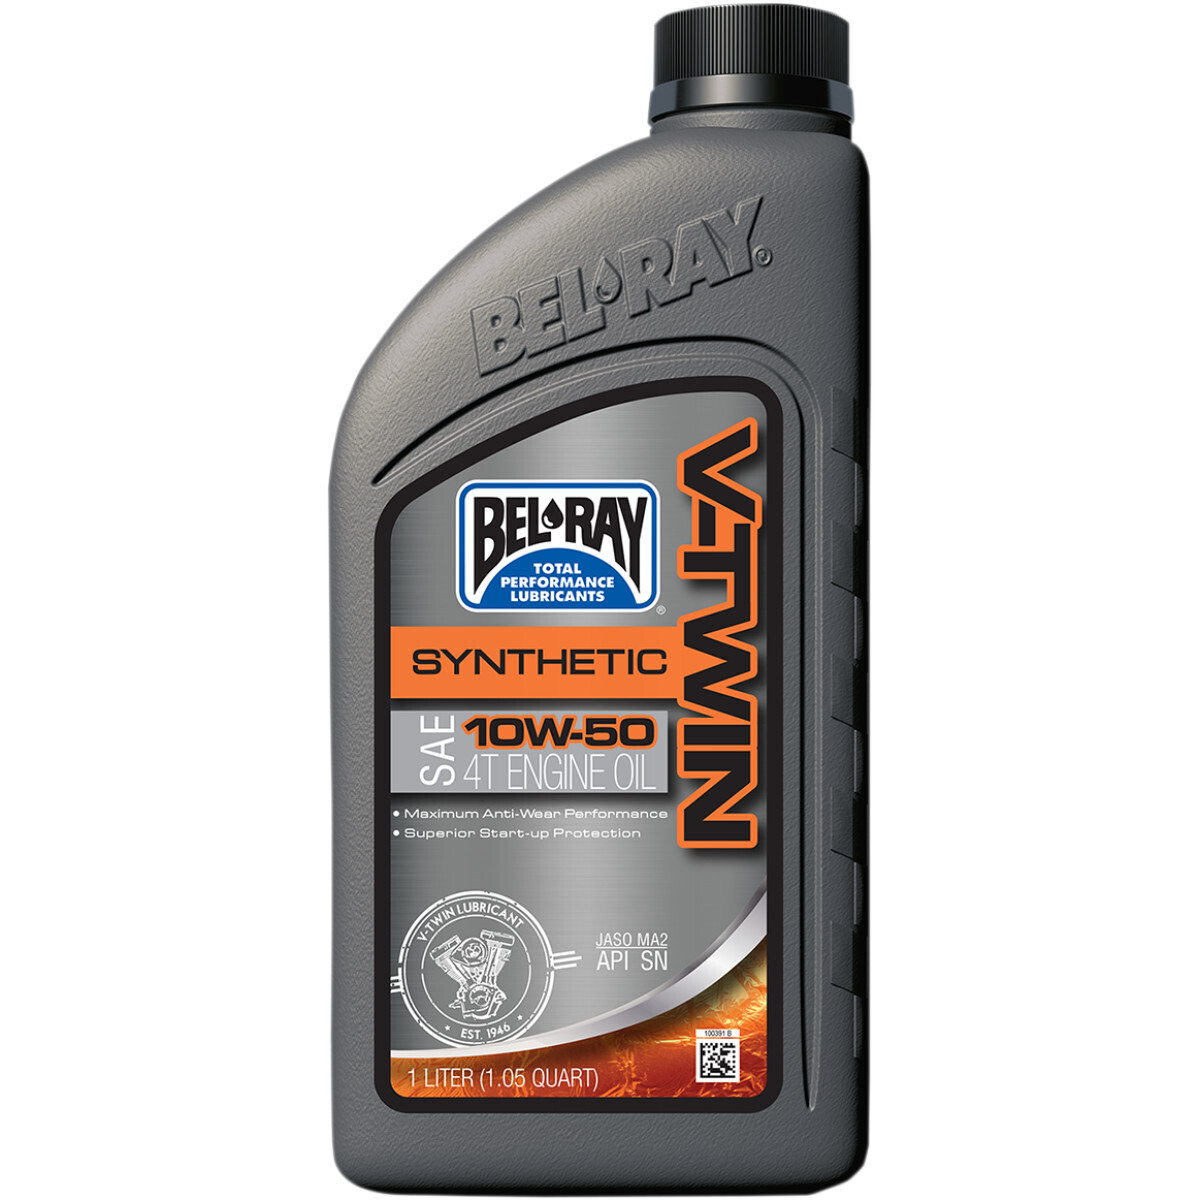 BEL-RAY
ENGINE OIL VTWIN 10W-50 1 LITER